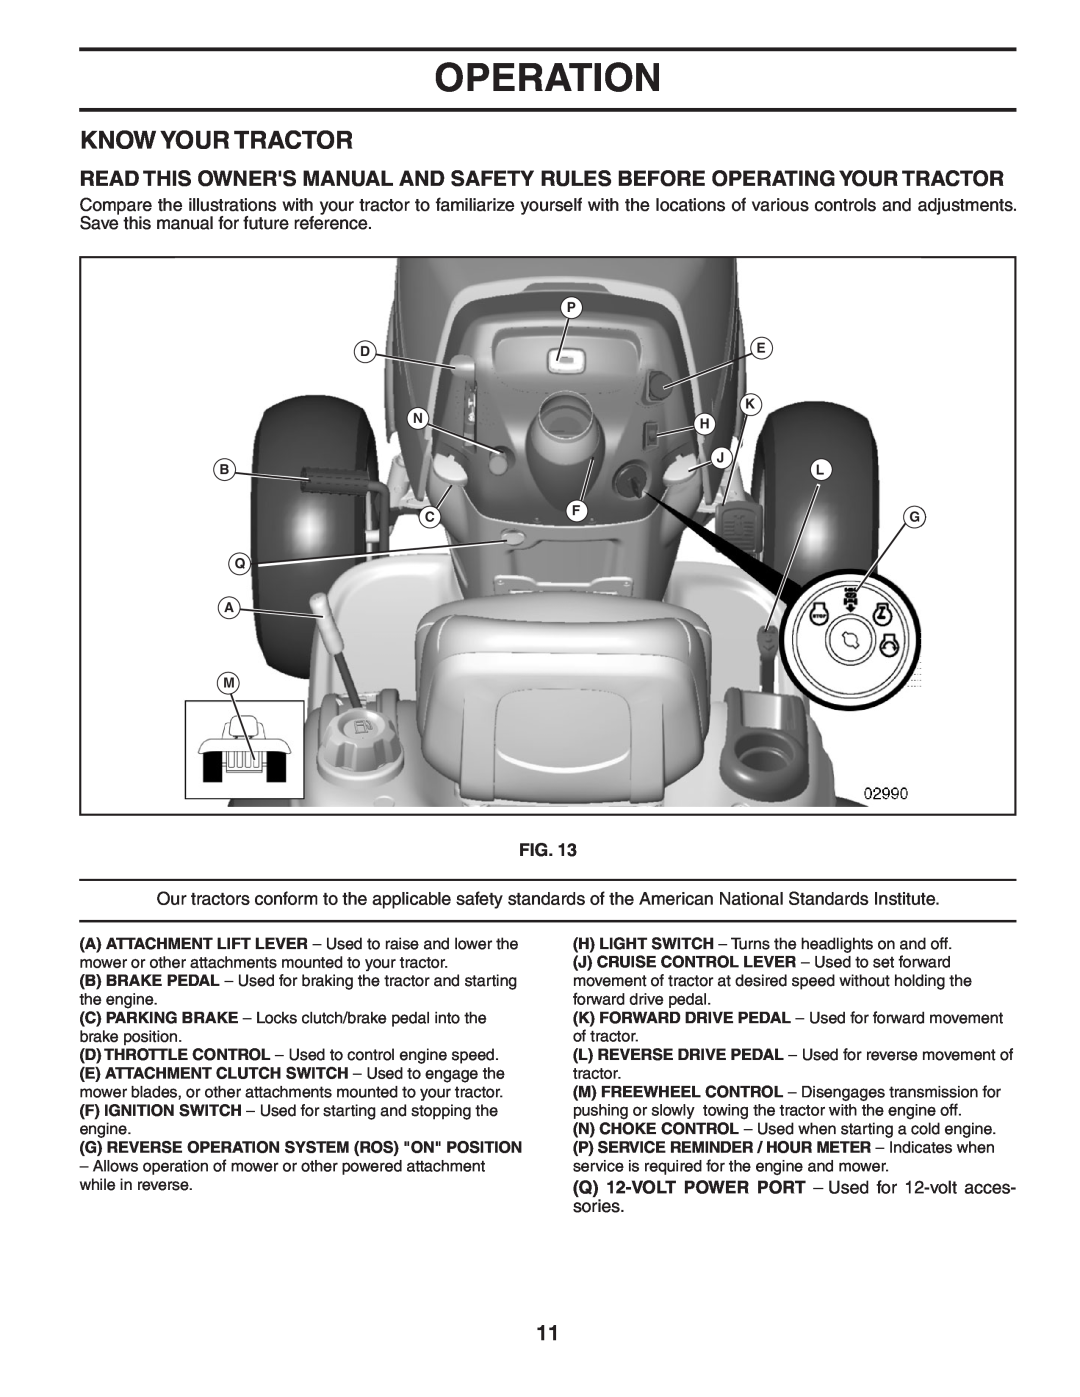 Poulan PBGTE, 406255 manual Know Your Tractor, Operation 